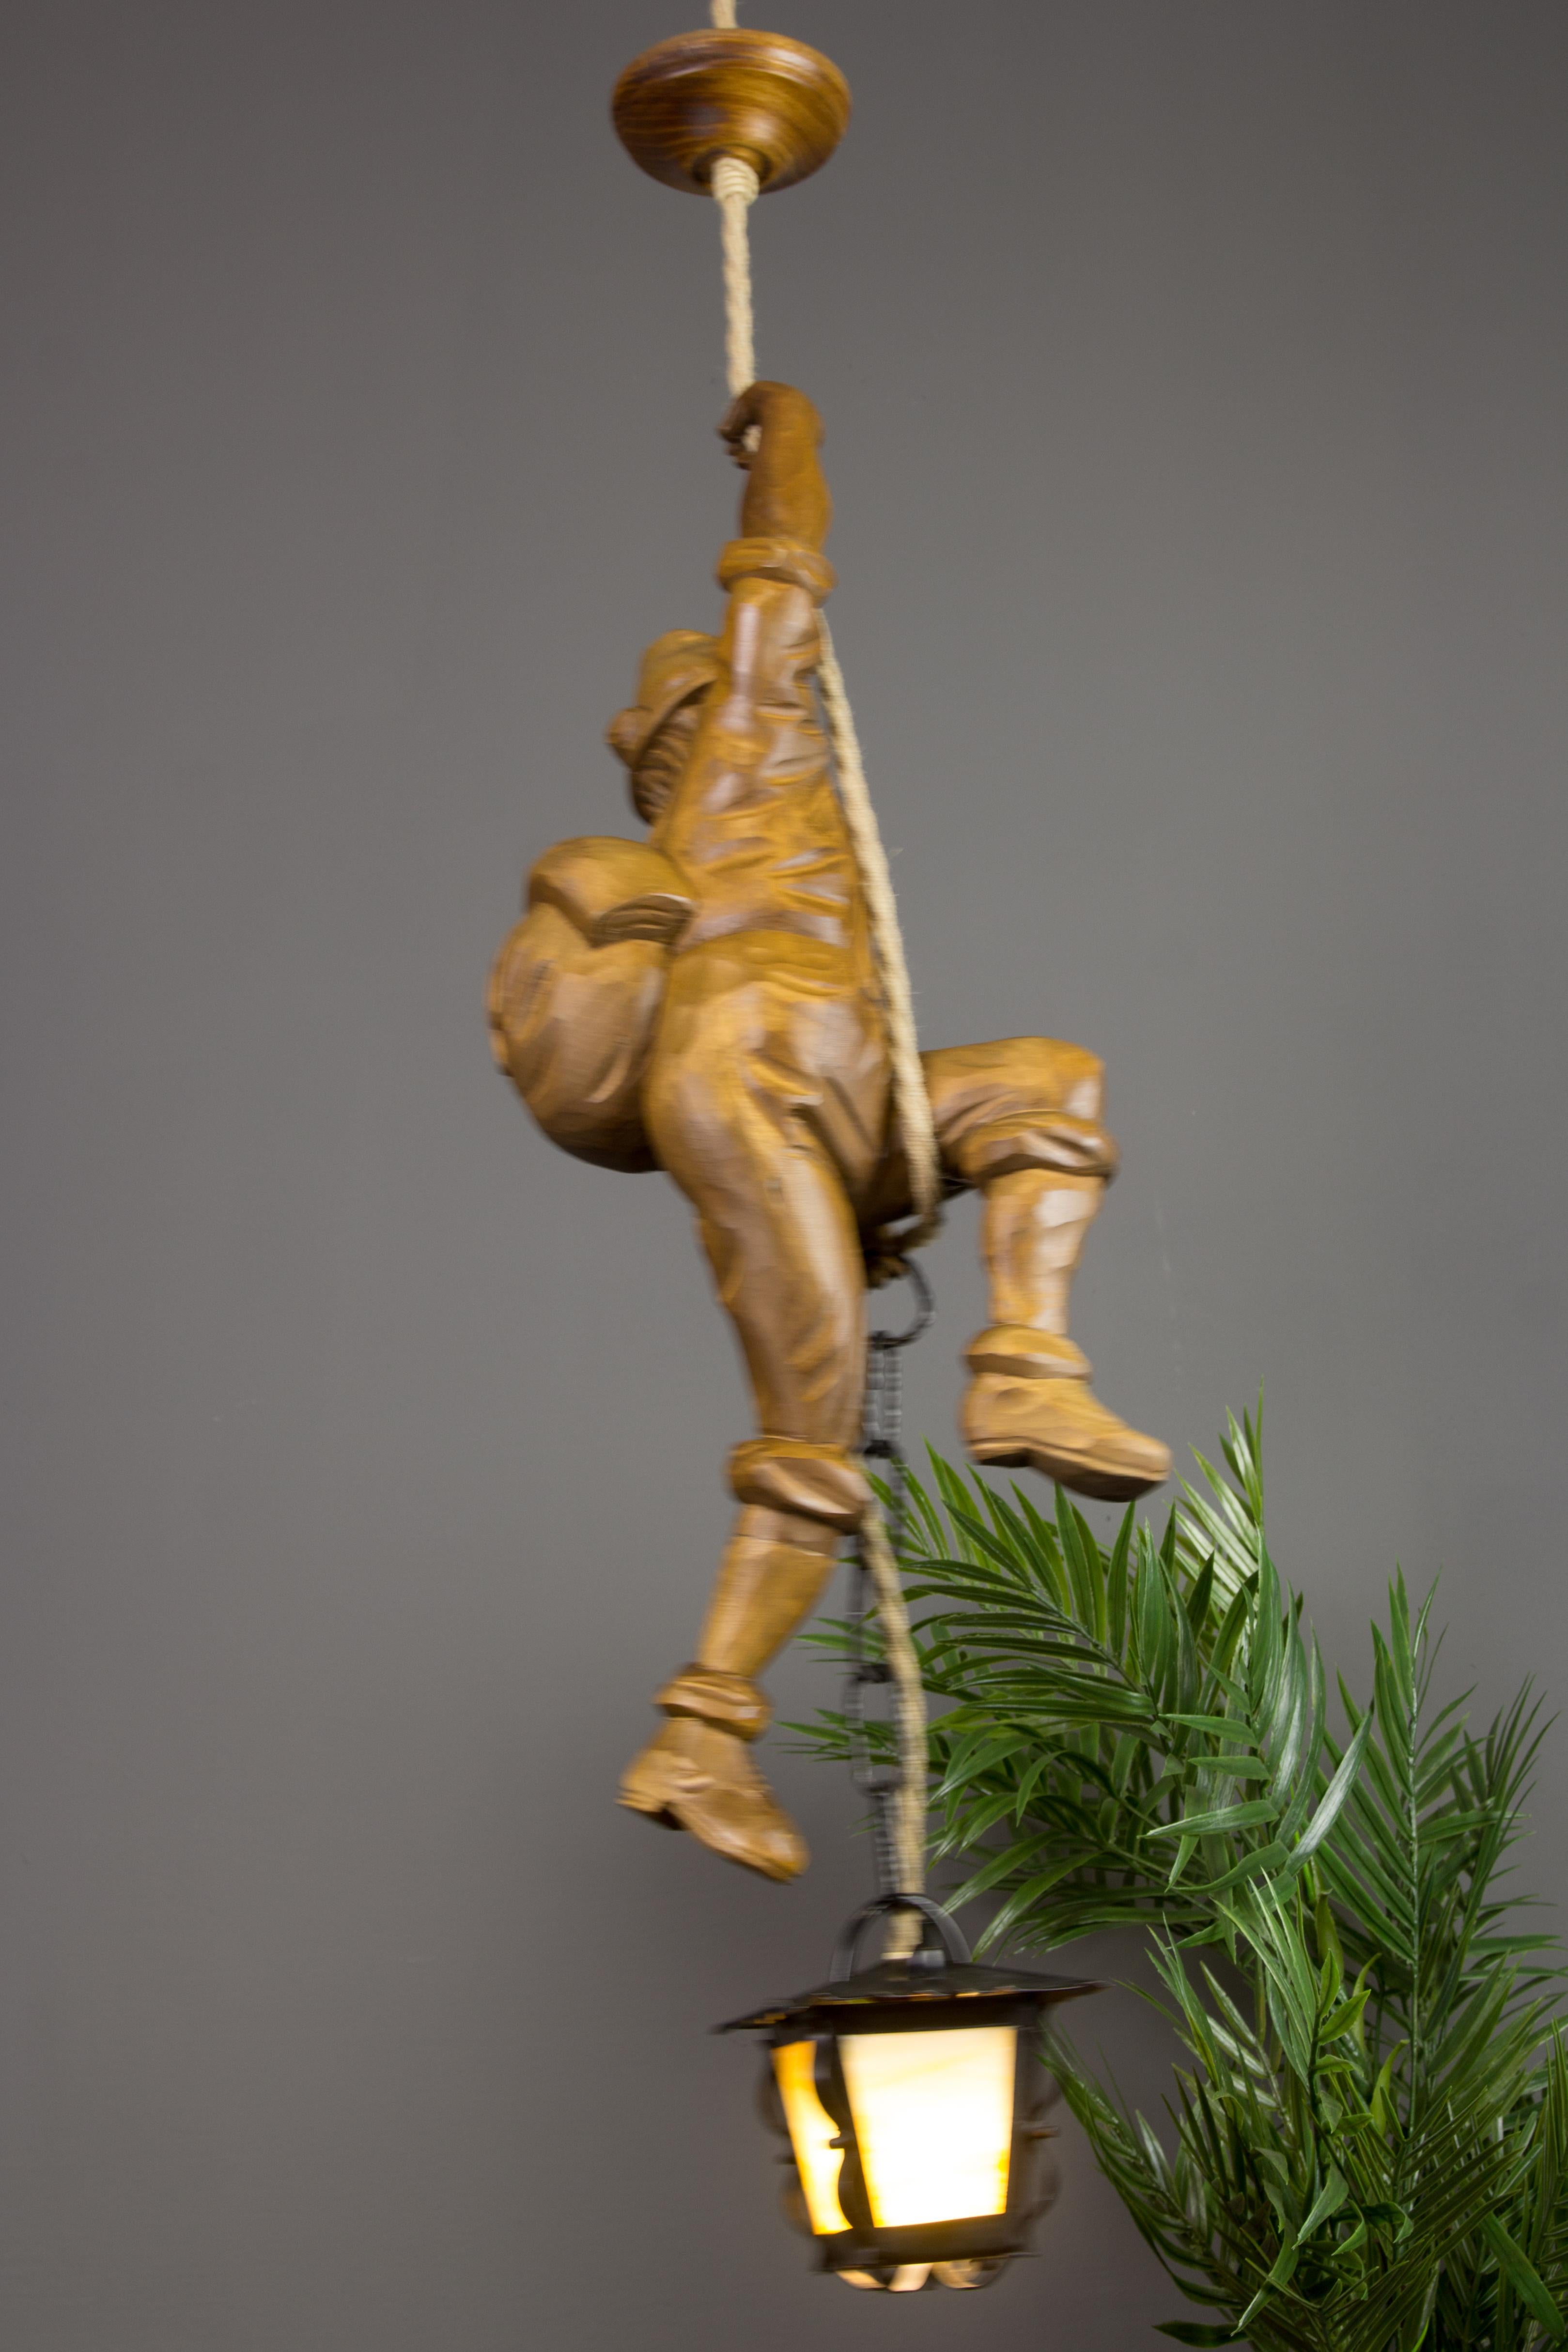 Mid-20th Century Pendant Light Hand Carved Wood Figure Mountaineer Climber with Lantern, Germany For Sale